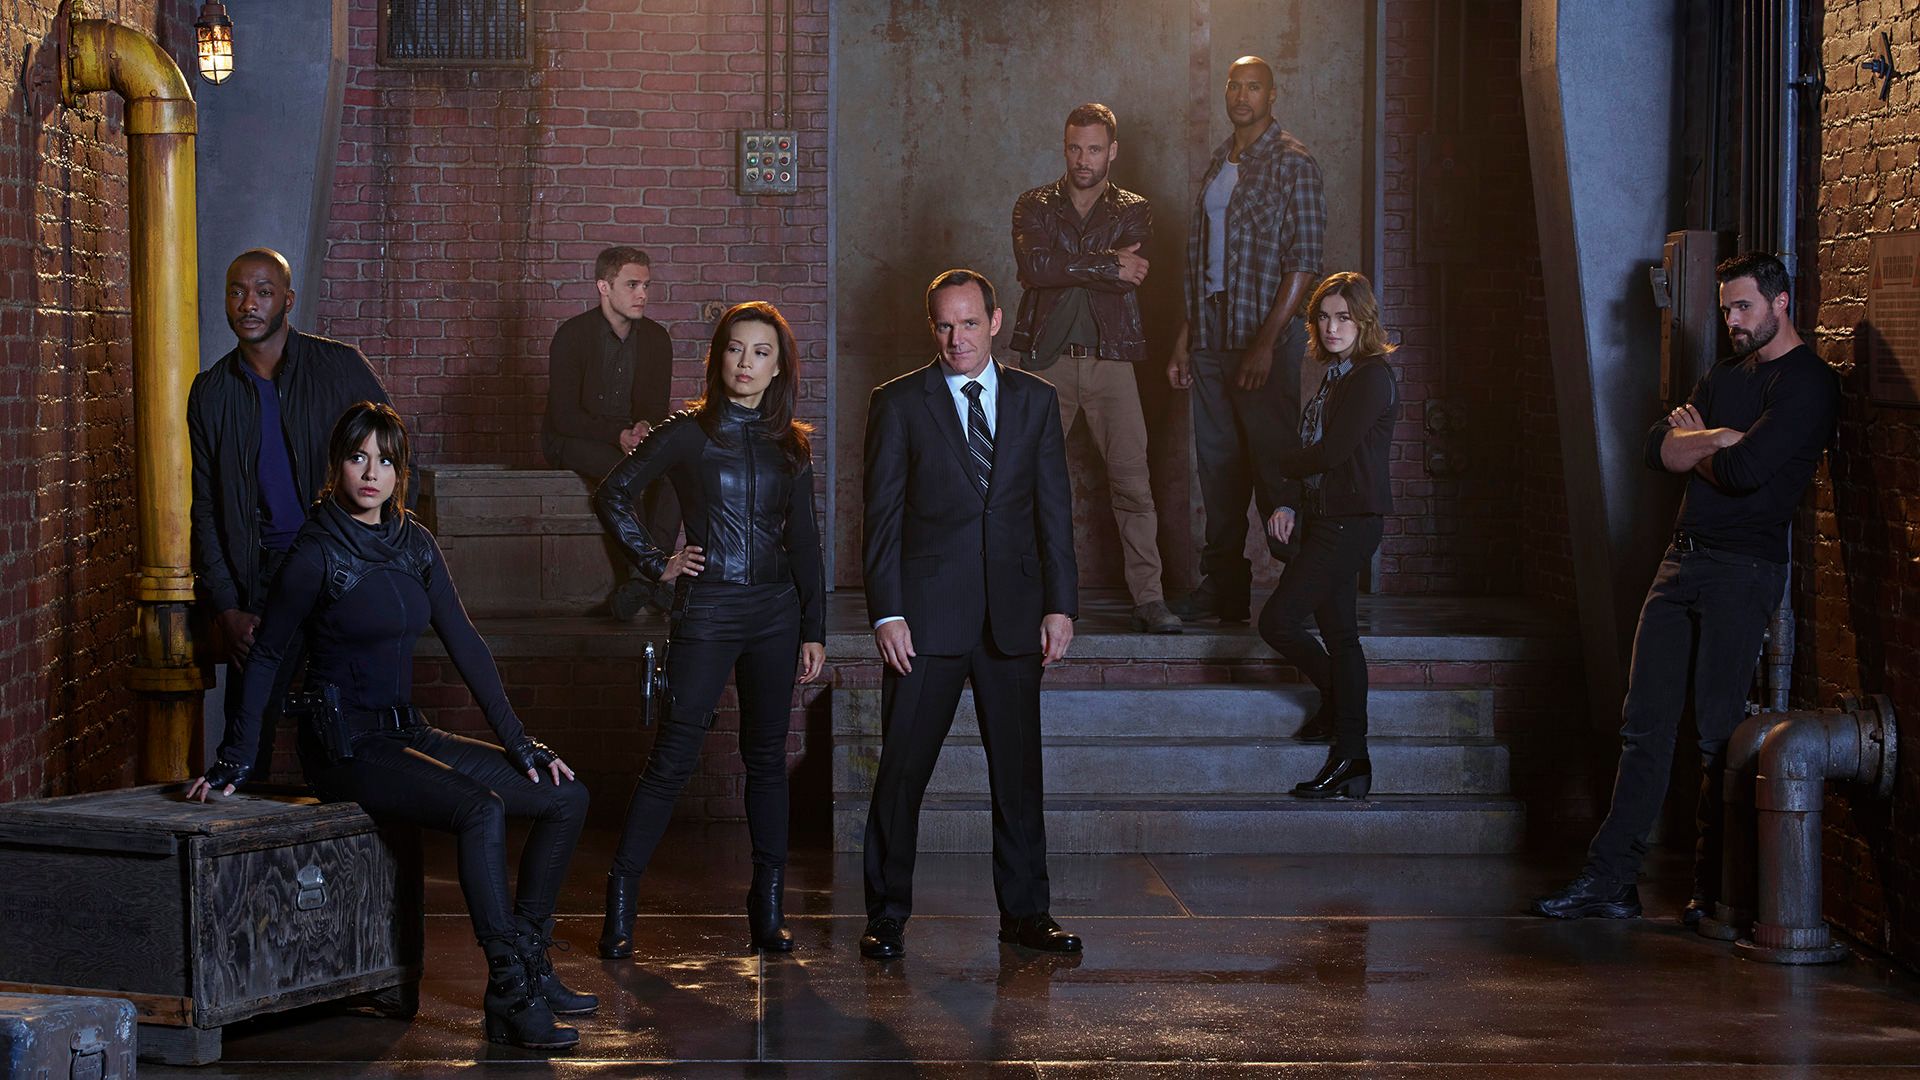 Agents of S.H.I.E.L.D. background